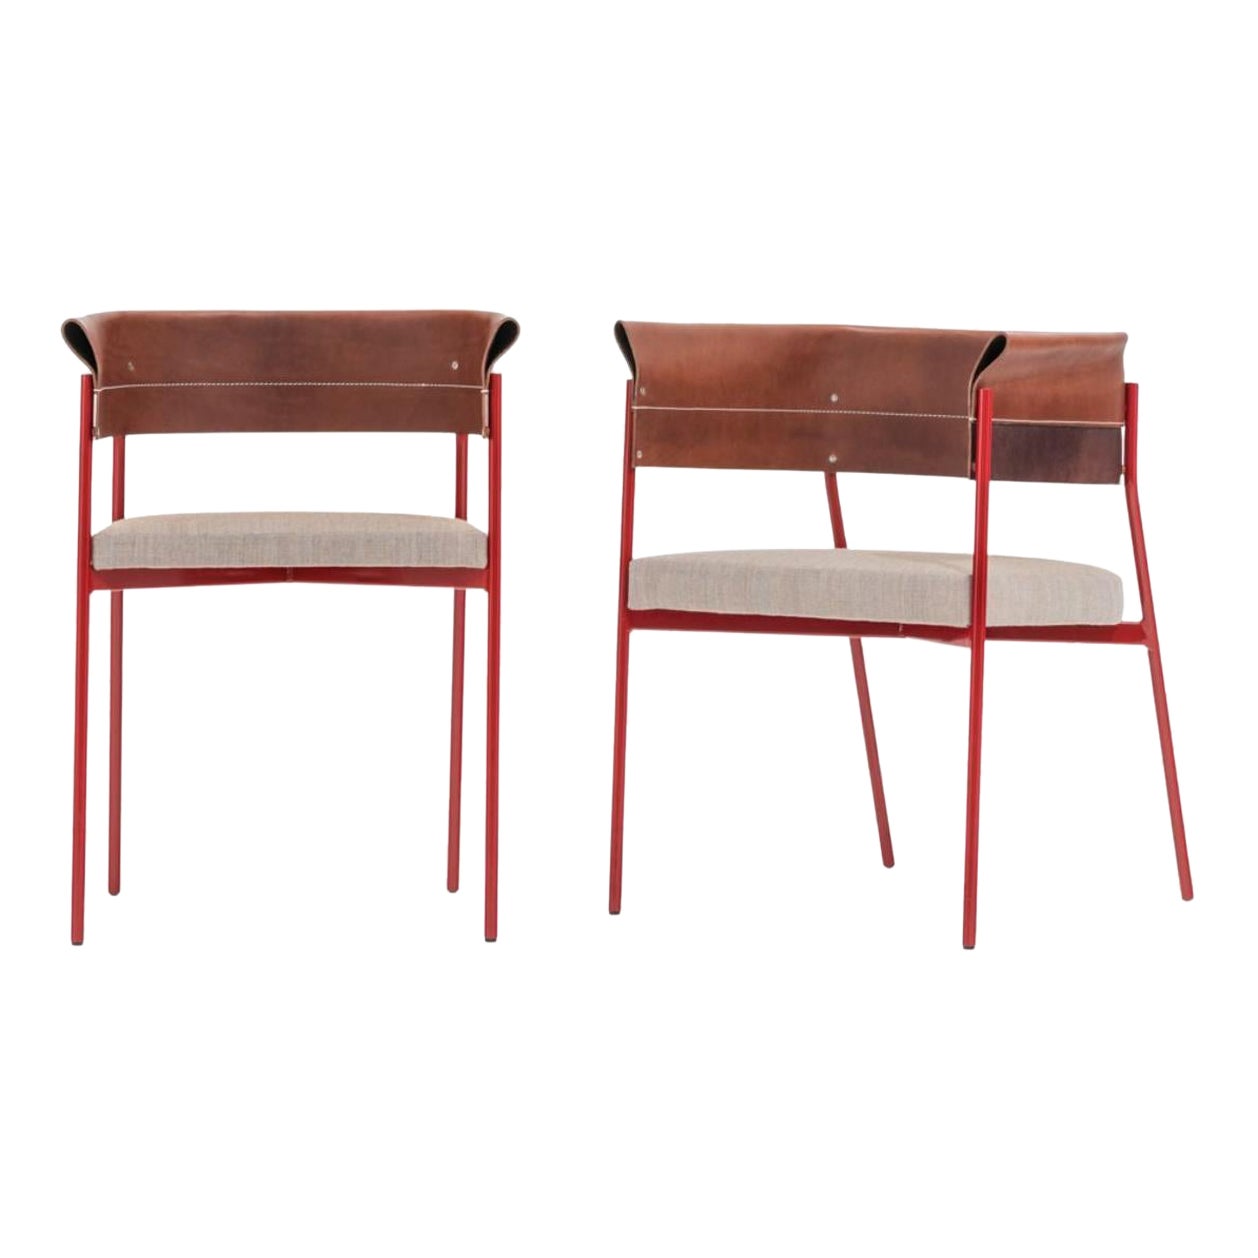 Set of 2 Gomito Chairs by SEM